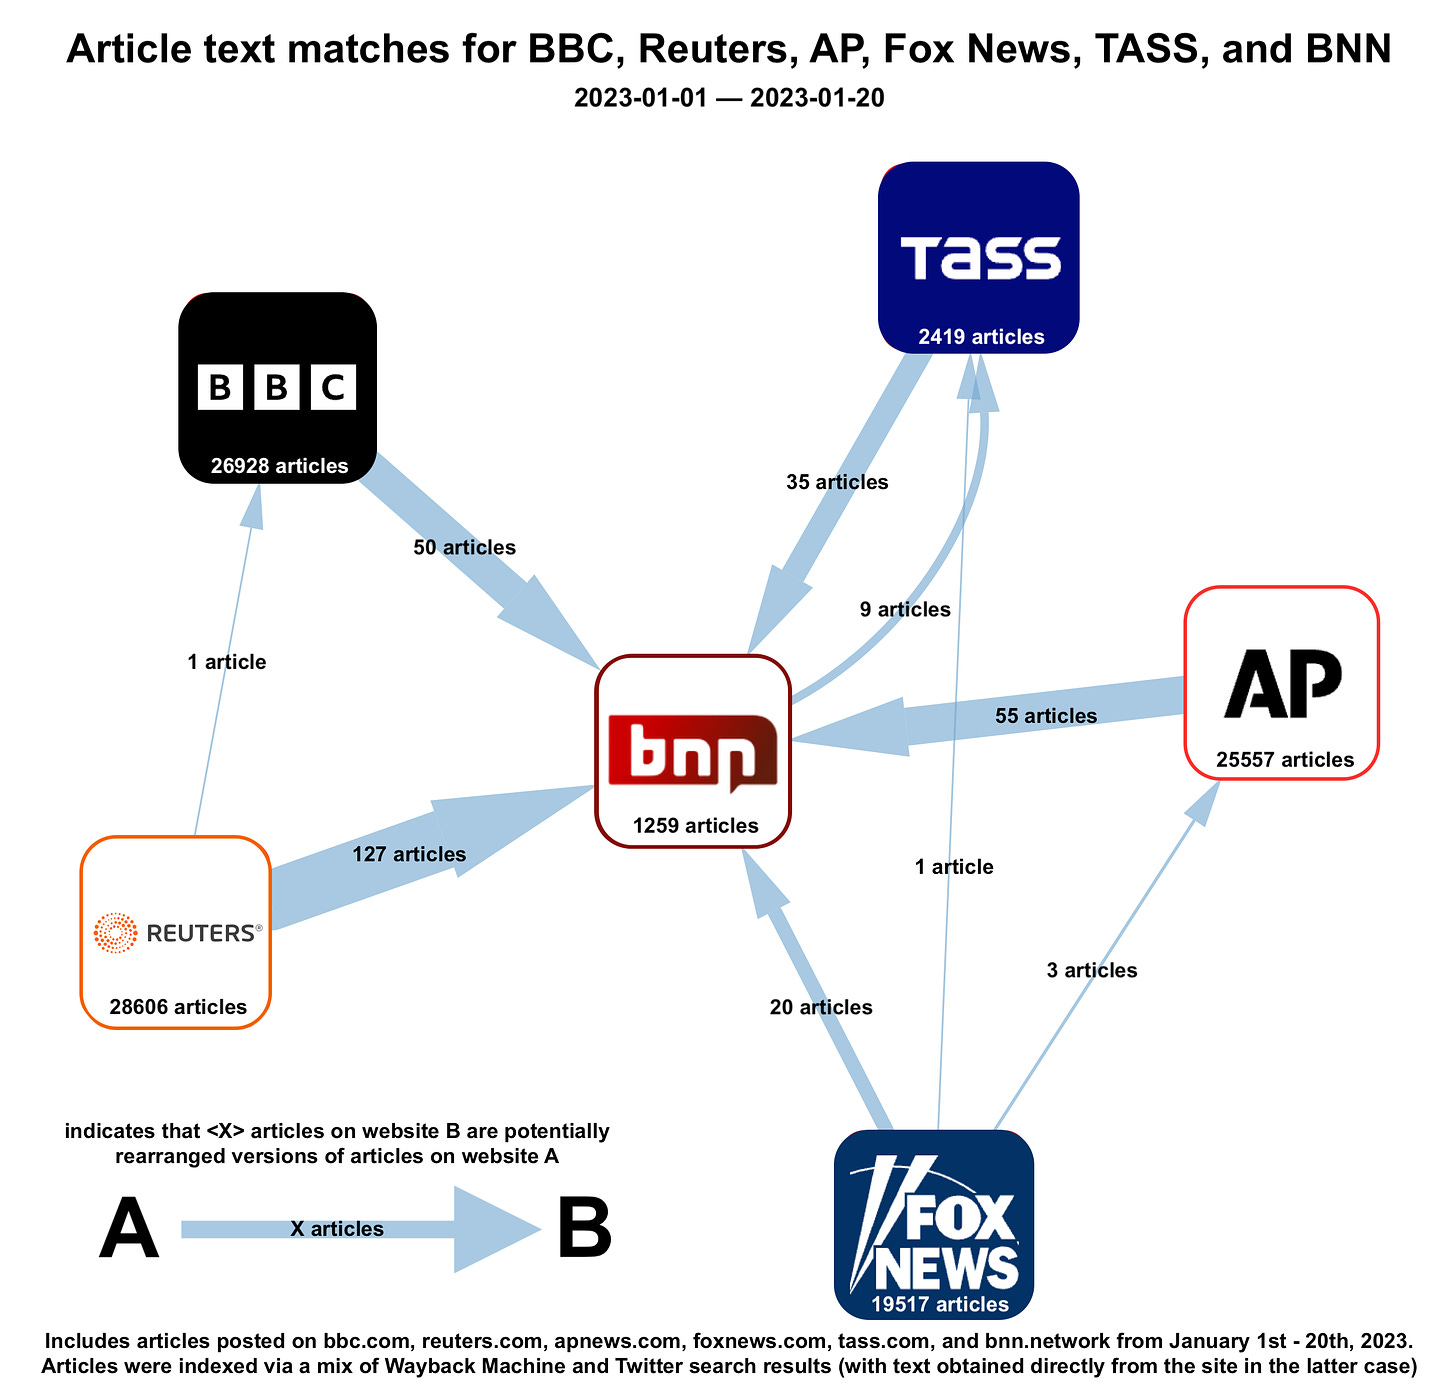 network diagram showing the number of text matches between each pair of media outlets (very little evidence of copying by any outlet other than BNN